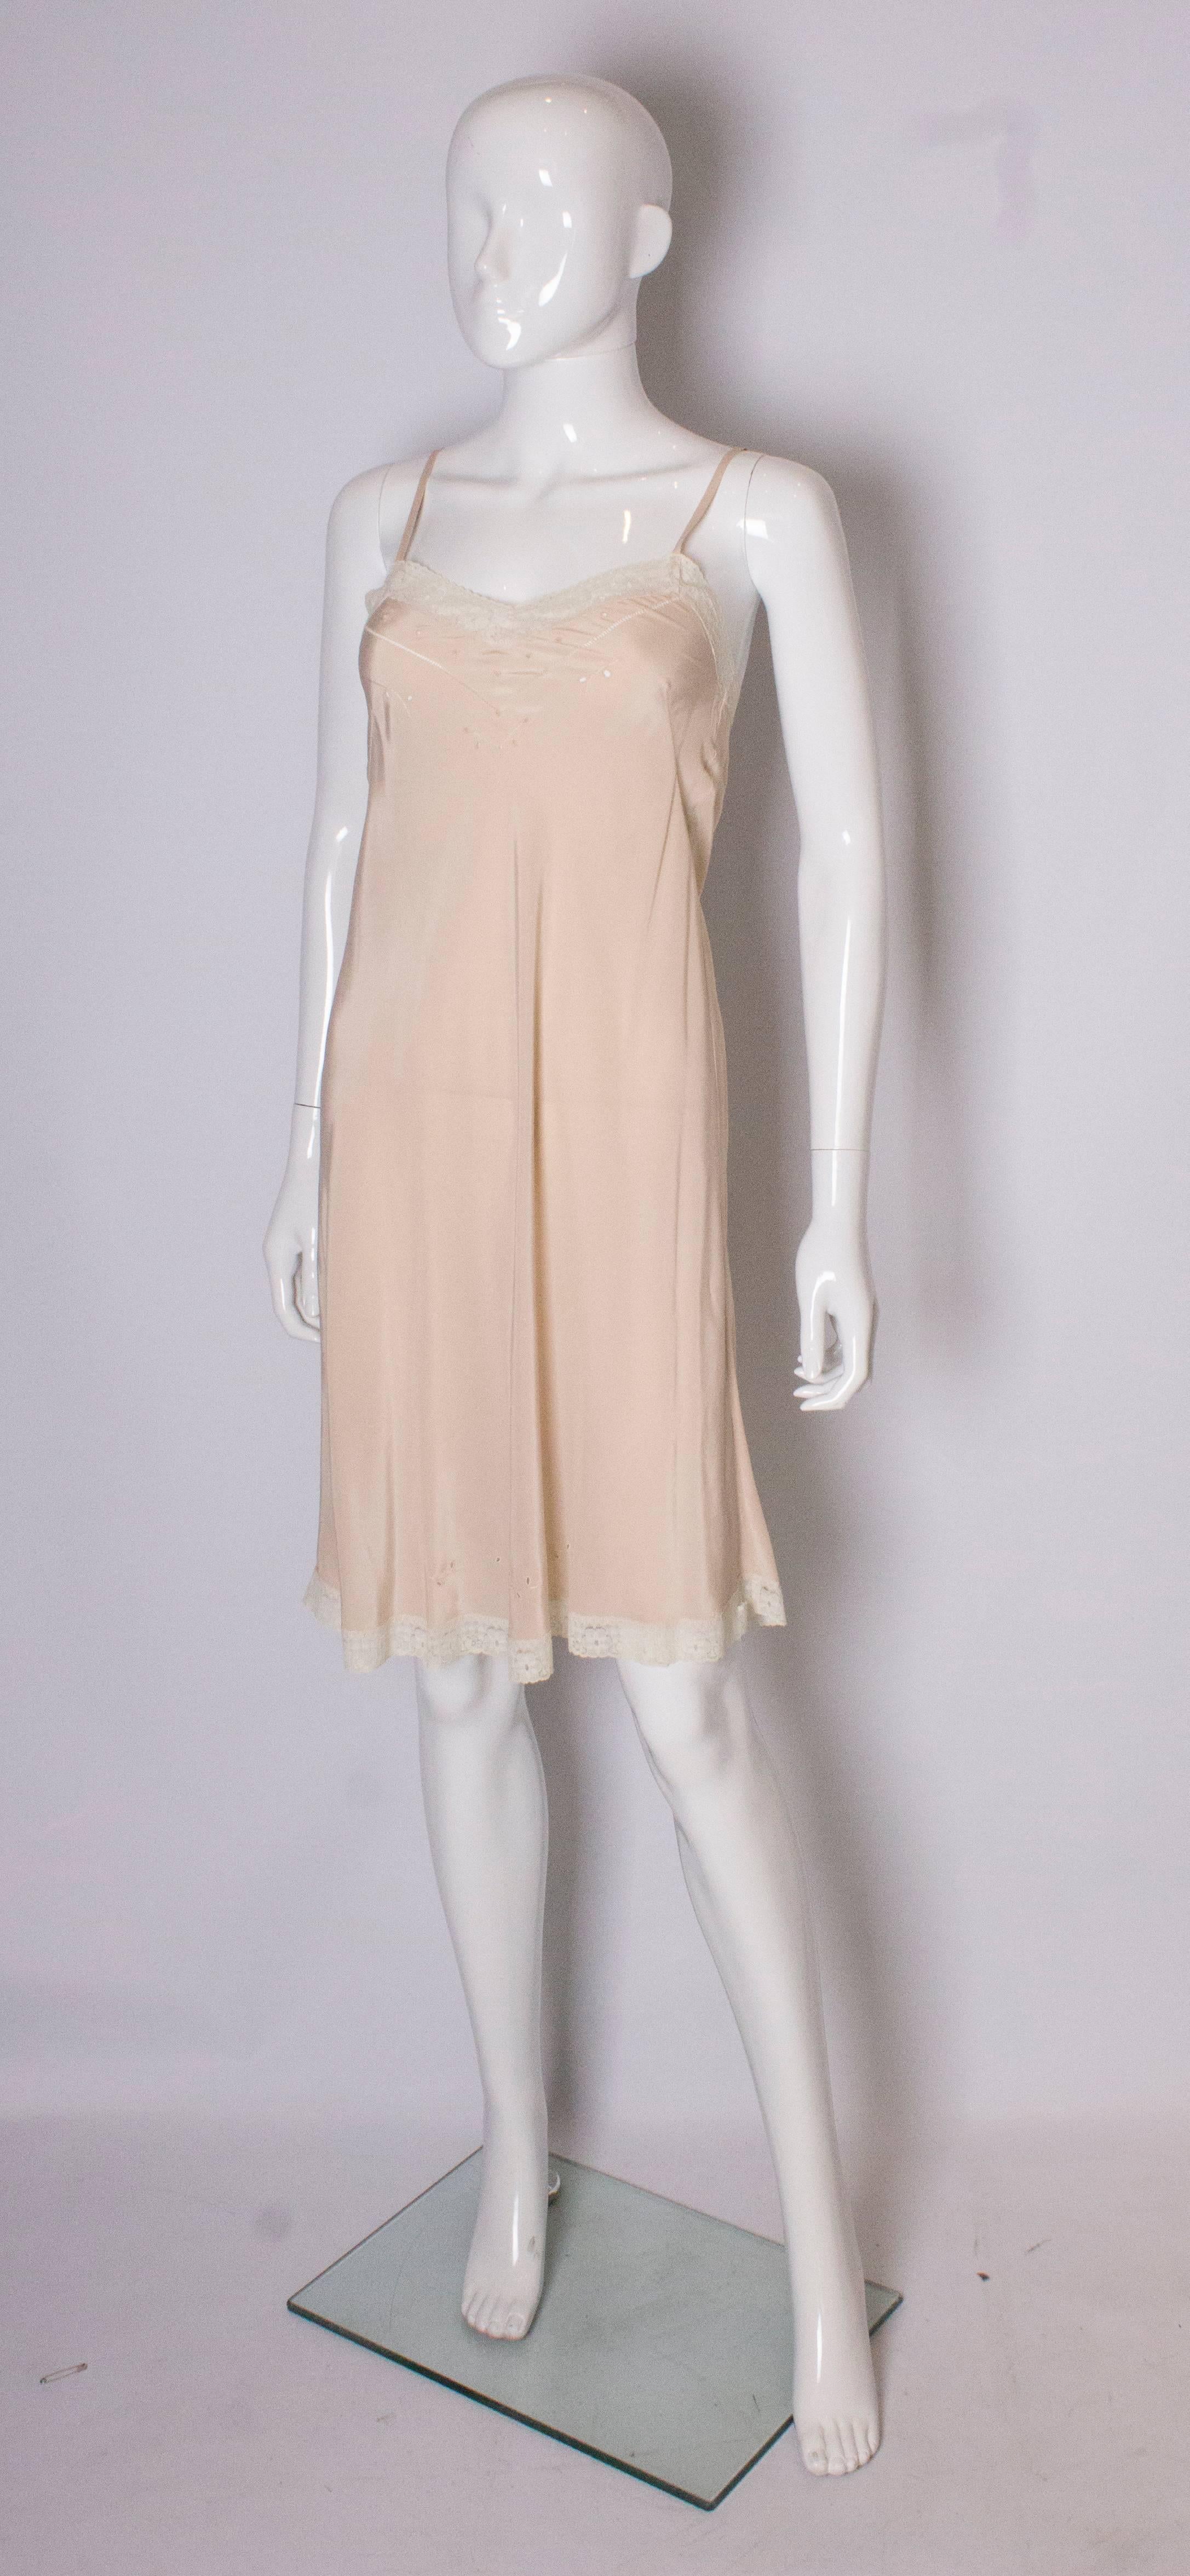 A lovely vintage slip in a heavy silk, in a caramel colour with lace trim and stitch detail.